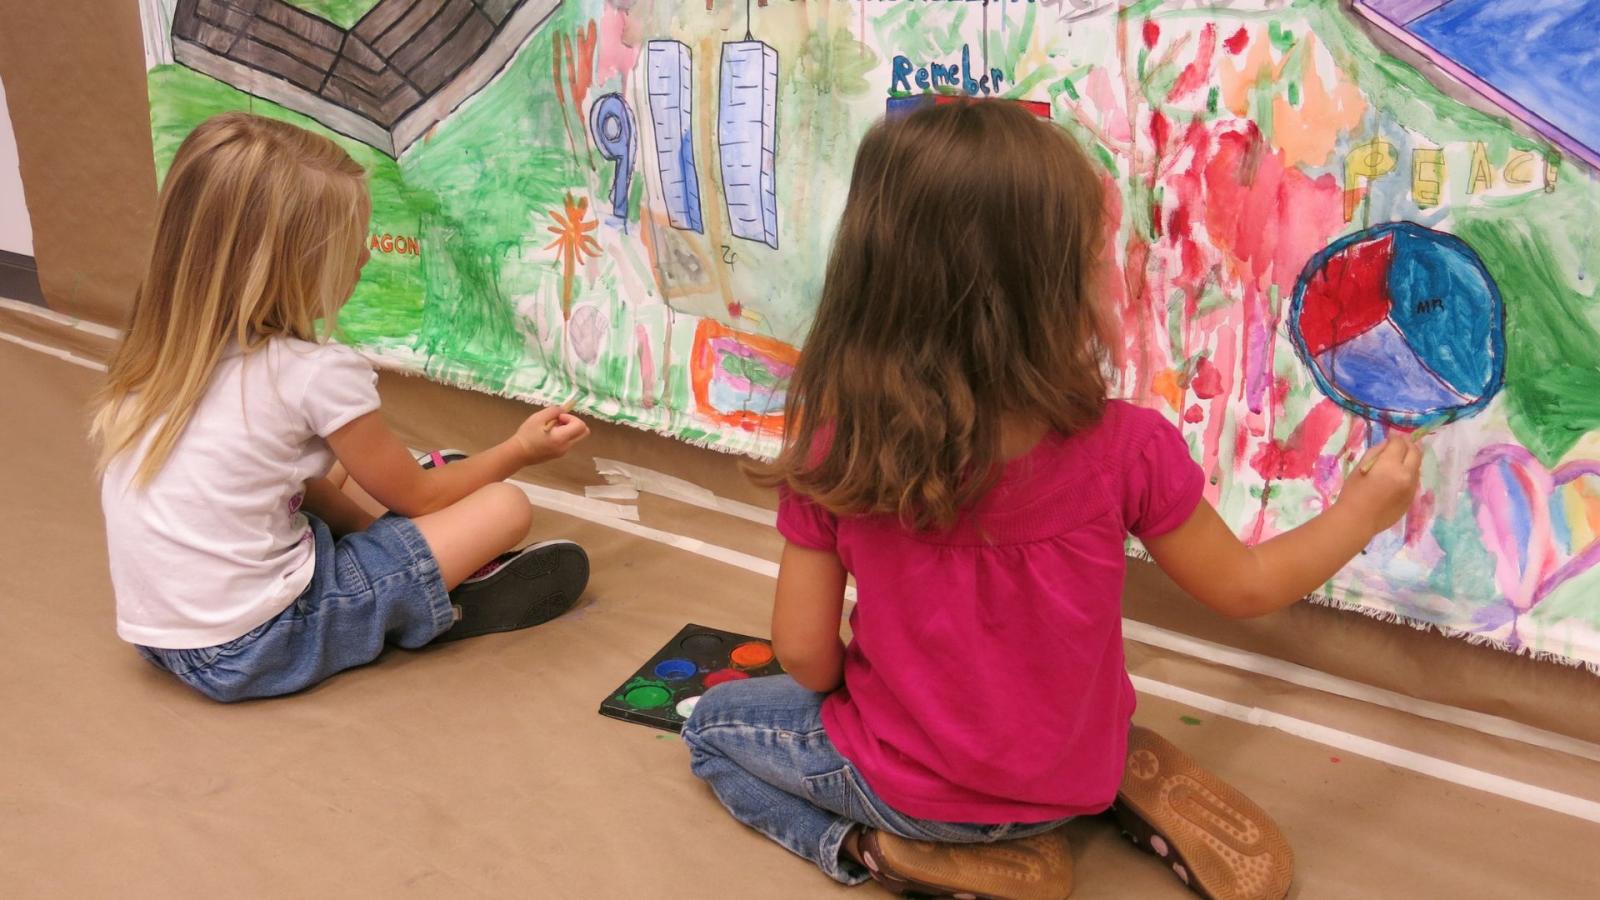 Two small girls, seated, paint a mural on a wall